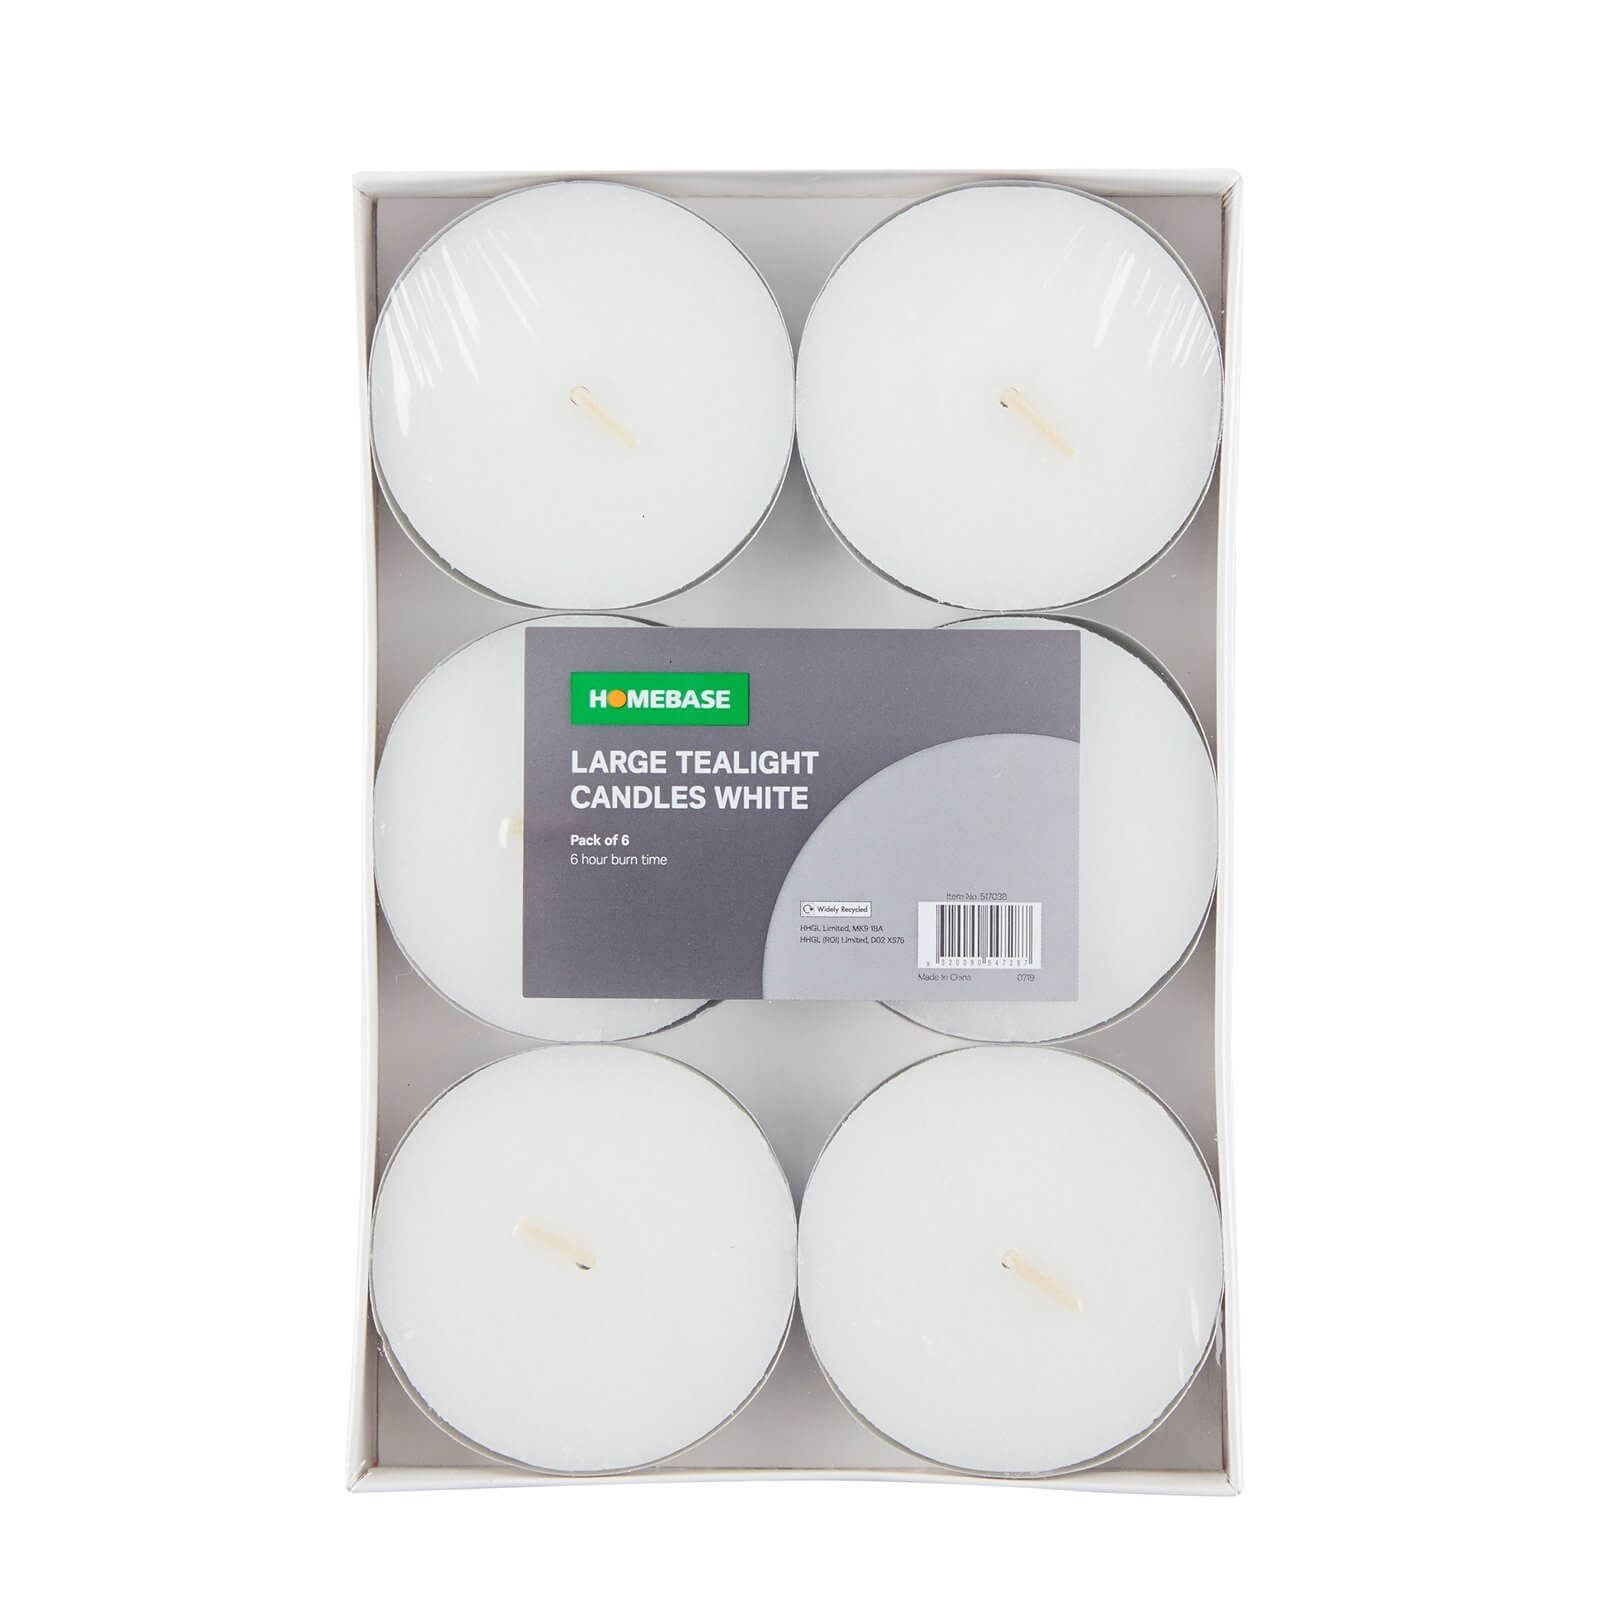 Pacl of 6 Large Tealight Candles - White